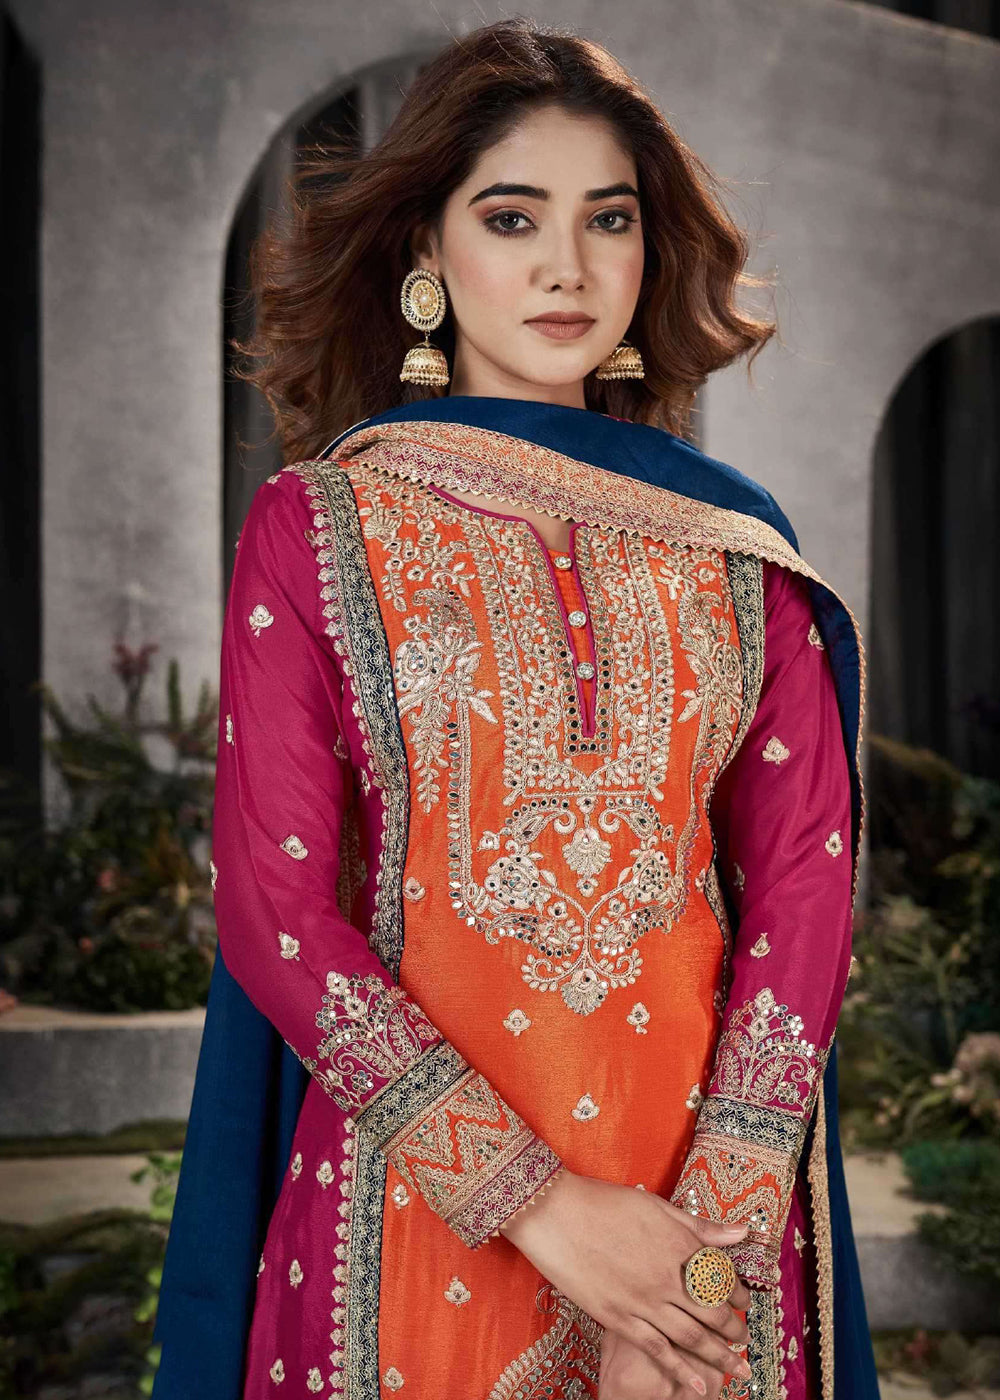 Buy Now Orange Multicolor Mirror Embroidered Punjabi Style Palazzo Suit Online in USA, UK, Canada, Germany, Australia & Worldwide at Empress Clothing.